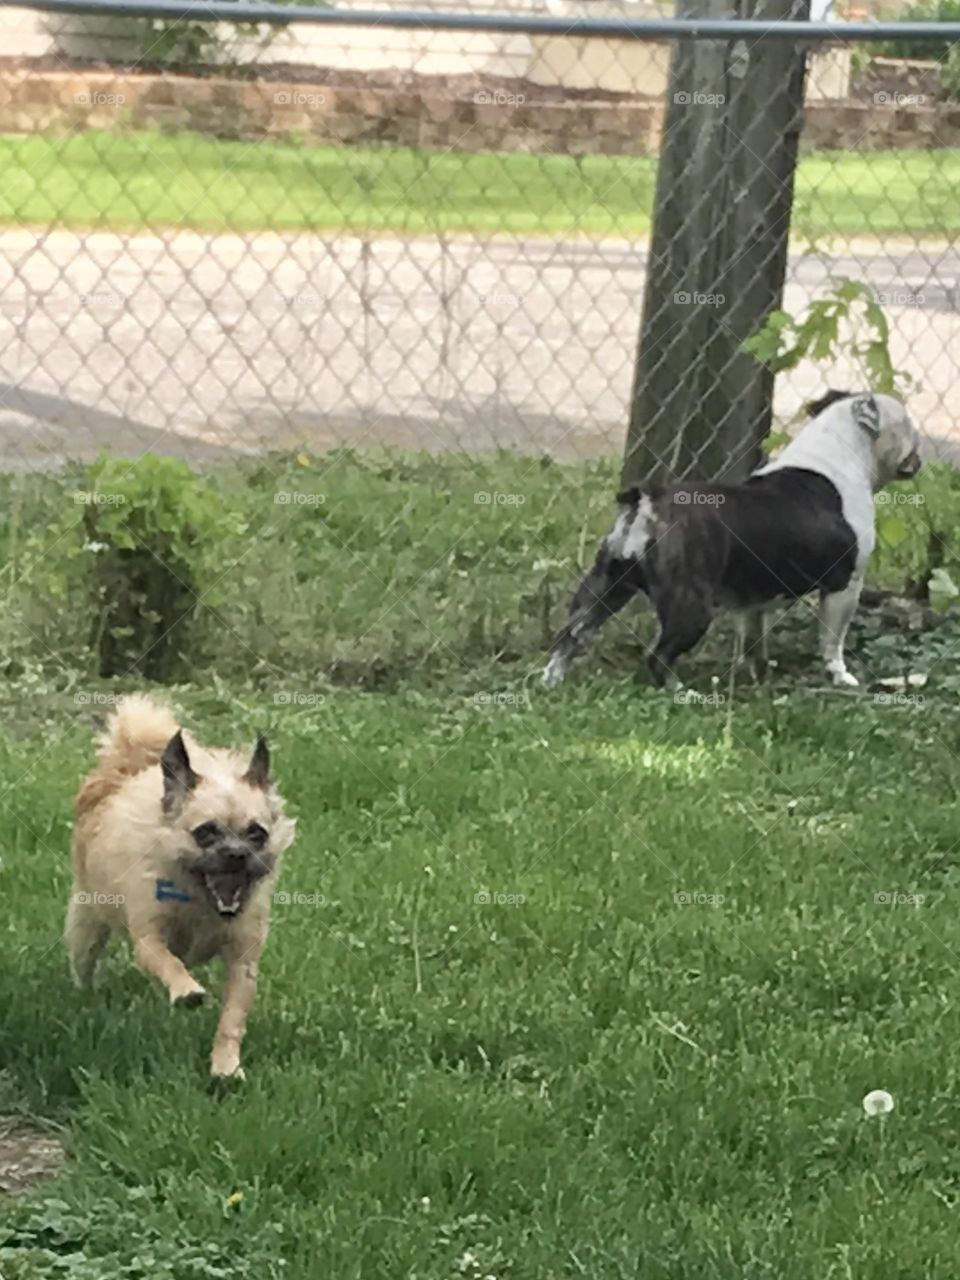 Dogs in the fence